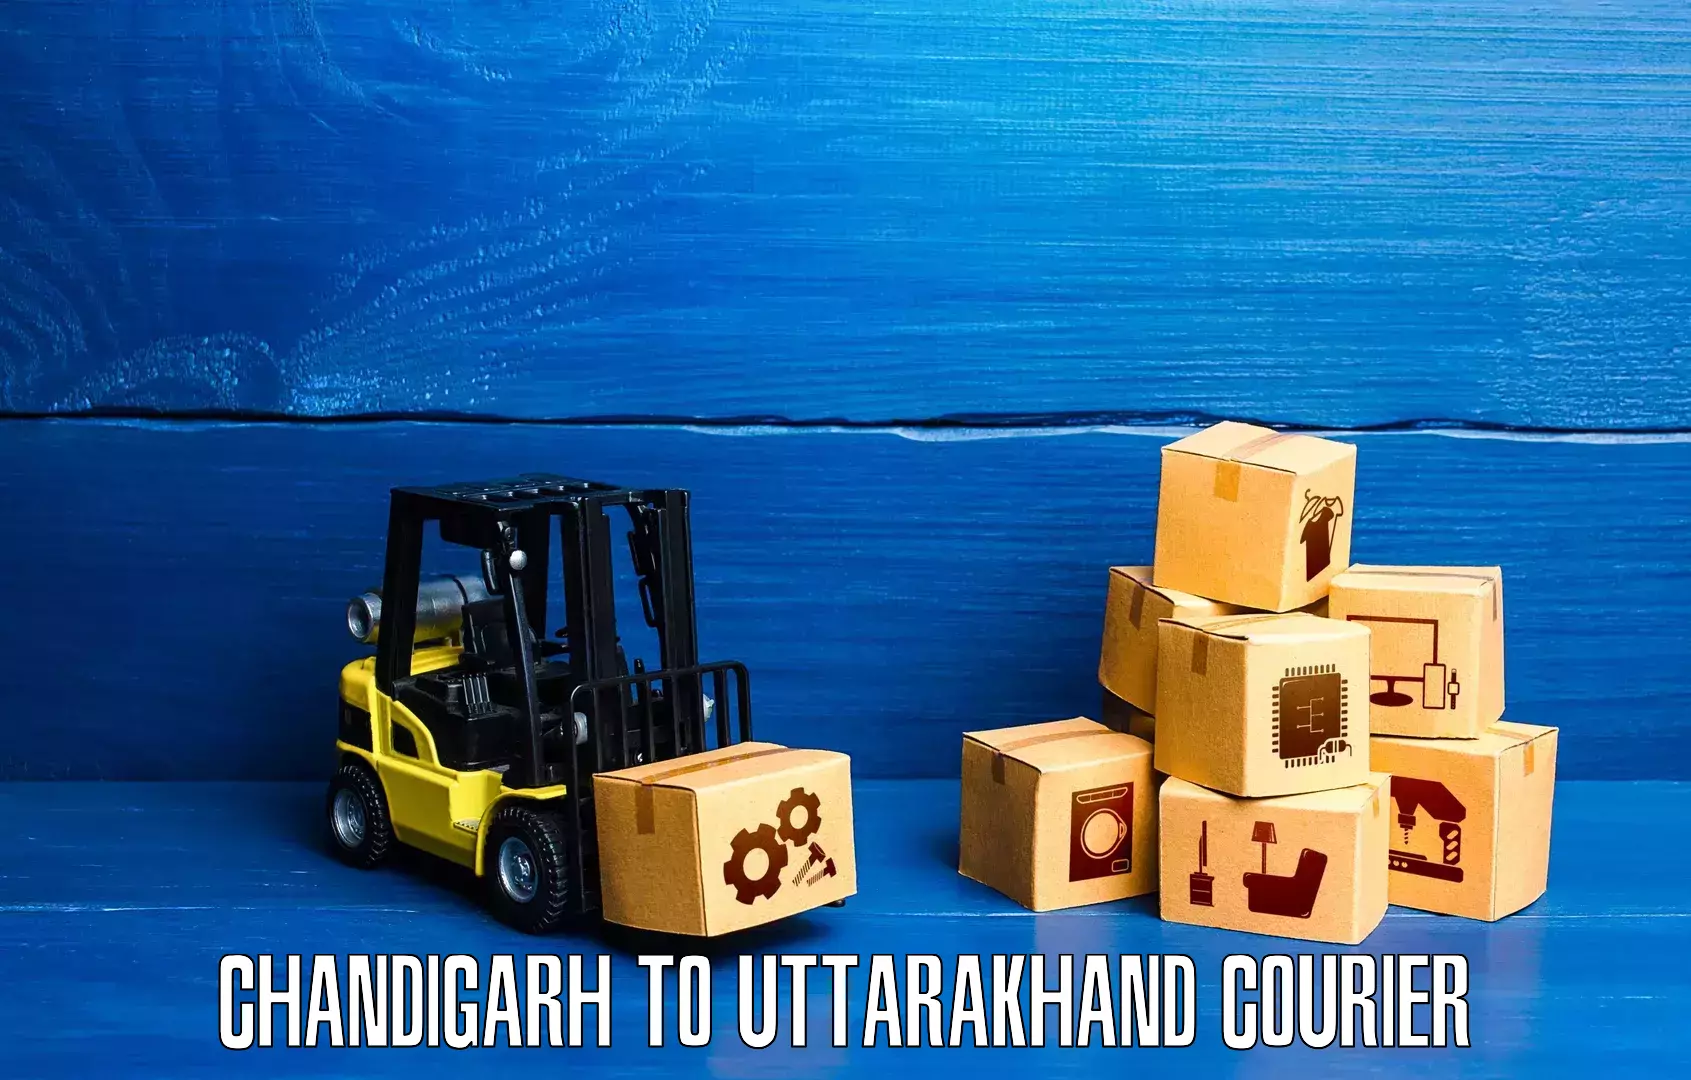 Personal courier services in Chandigarh to Haridwar